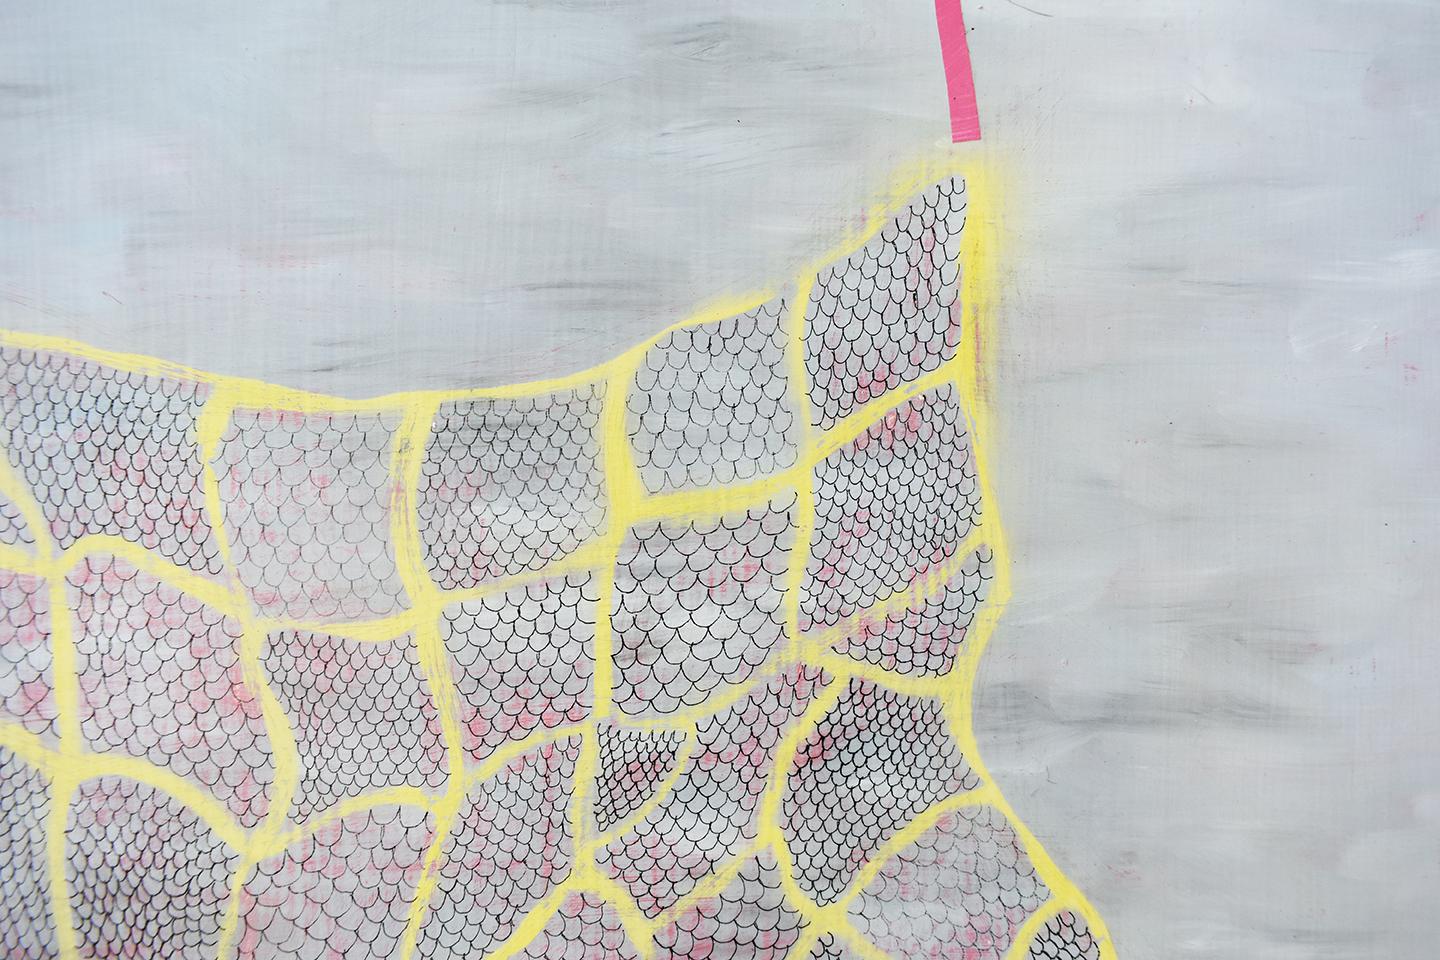 Net (Non-Representational Painting of Yellow Grid on Wood Panel)
16 x 16 x 2 inches
encaustic, collage on wood panel
Signed on reverse 

This abstract work on wood panel was created by Poughkeepsie-based artist, Donise English, who received her MFA